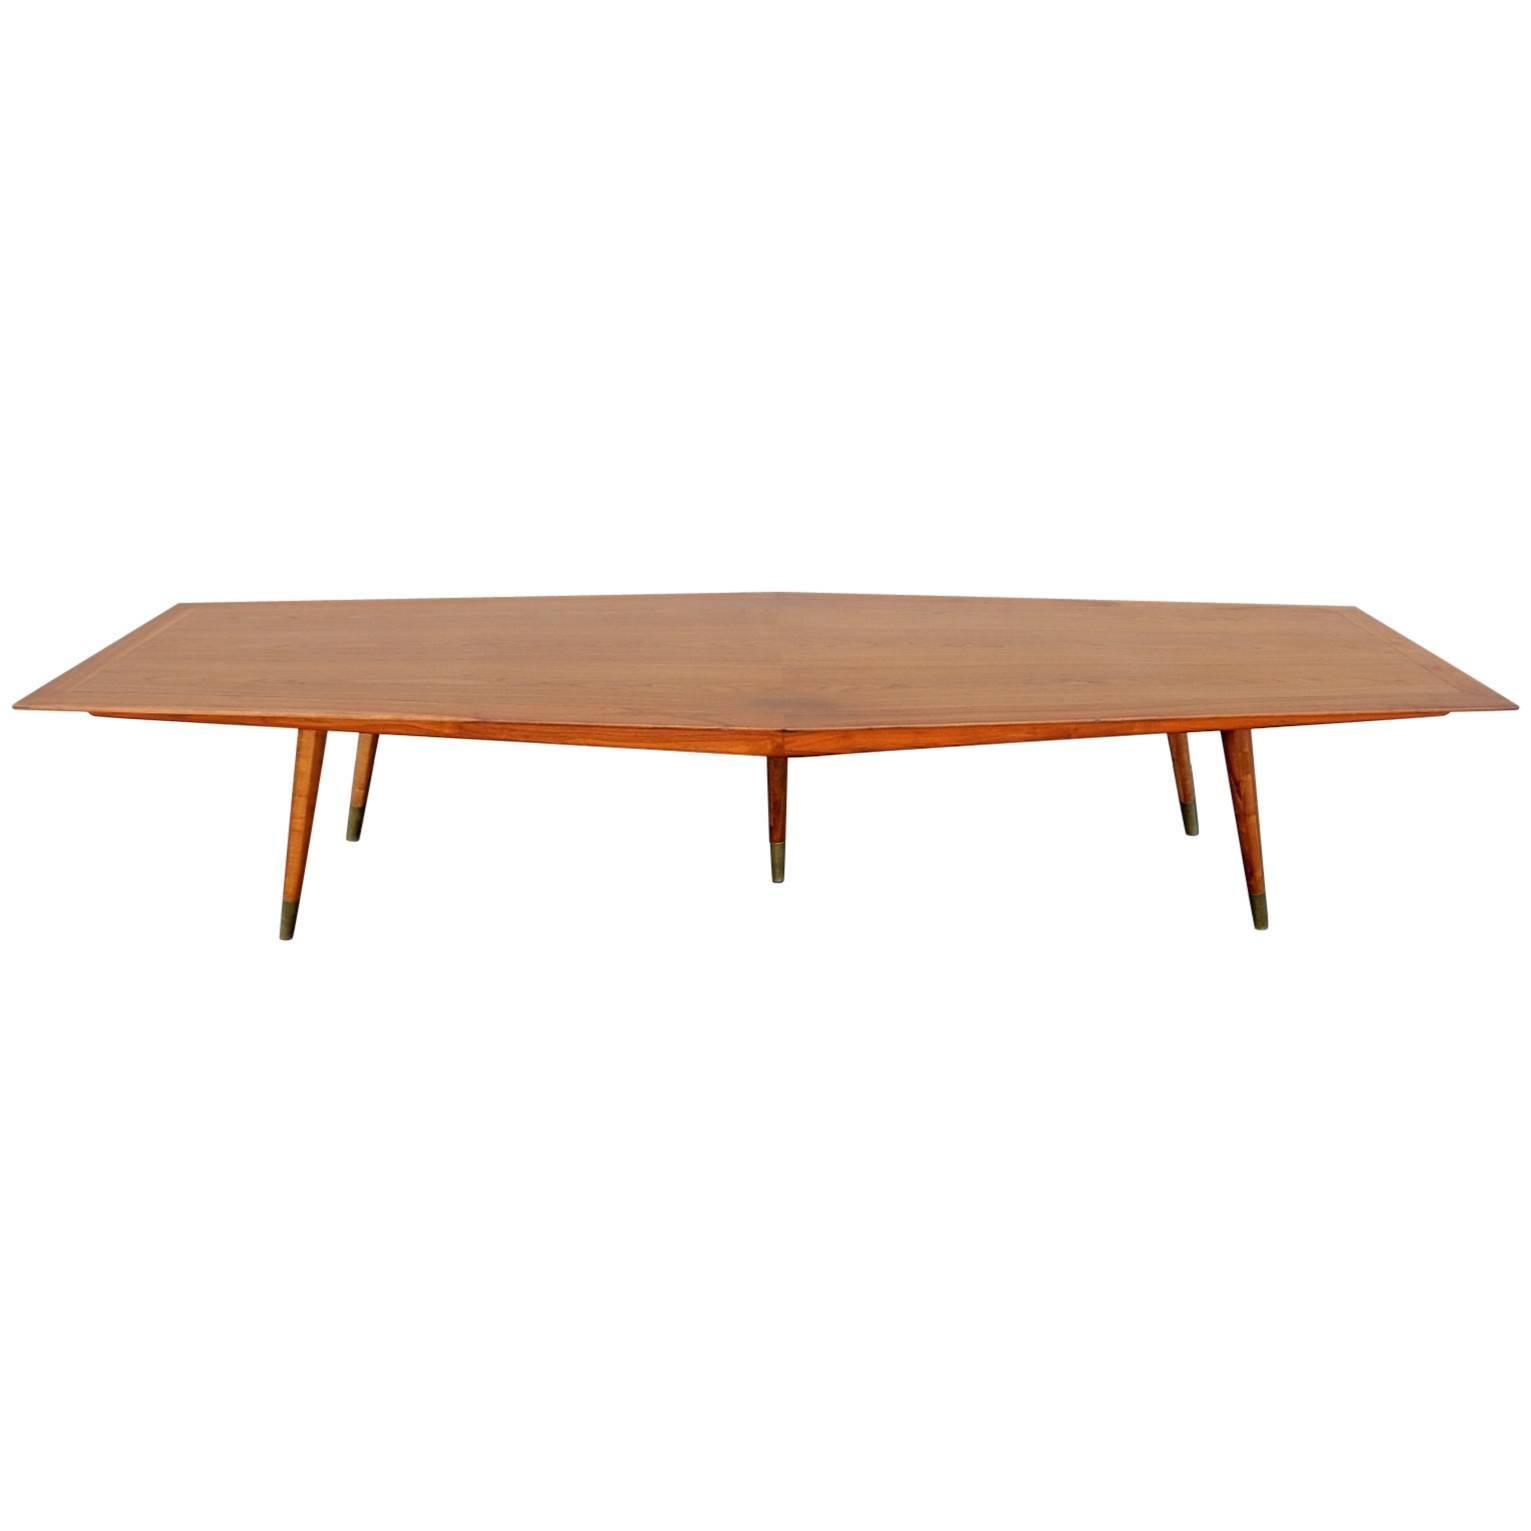 Mid-Century Modern 12 Foot Conference Table by Stow-Davis, circa 1958